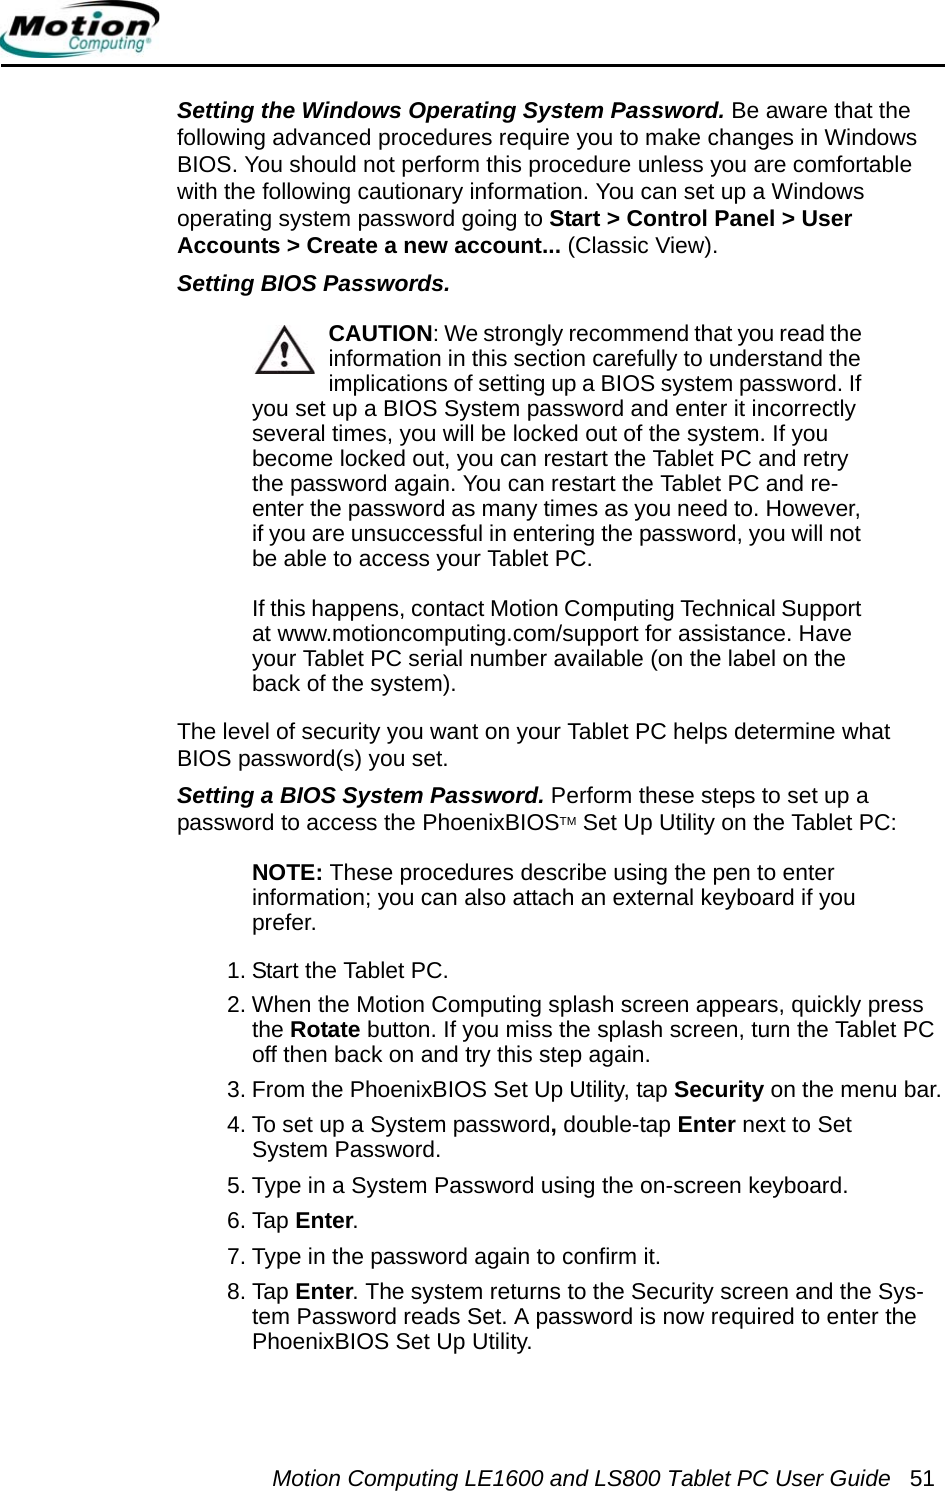 Motion Computing LE1600 and LS800 Tablet PC User Guide 51Setting the Windows Operating System Password. Be aware that the following advanced procedures require you to make changes in Windows BIOS. You should not perform this procedure unless you are comfortable with the following cautionary information. You can set up a Windows operating system password going to Start &gt; Control Panel &gt; User Accounts &gt; Create a new account... (Classic View).Setting BIOS Passwords. CAUTION: We strongly recommend that you read the information in this section carefully to understand the implications of setting up a BIOS system password. If you set up a BIOS System password and enter it incorrectly several times, you will be locked out of the system. If you become locked out, you can restart the Tablet PC and retry the password again. You can restart the Tablet PC and re-enter the password as many times as you need to. However, if you are unsuccessful in entering the password, you will not be able to access your Tablet PC. If this happens, contact Motion Computing Technical Support at www.motioncomputing.com/support for assistance. Have your Tablet PC serial number available (on the label on the back of the system).The level of security you want on your Tablet PC helps determine what BIOS password(s) you set. Setting a BIOS System Password. Perform these steps to set up a password to access the PhoenixBIOSTM Set Up Utility on the Tablet PC:NOTE: These procedures describe using the pen to enterinformation; you can also attach an external keyboard if you prefer.1. Start the Tablet PC.2. When the Motion Computing splash screen appears, quickly press the Rotate button. If you miss the splash screen, turn the Tablet PC off then back on and try this step again.3. From the PhoenixBIOS Set Up Utility, tap Security on the menu bar.4. To set up a System password, double-tap Enter next to Set System Password.5. Type in a System Password using the on-screen keyboard. 6. Tap Enter.7. Type in the password again to confirm it. 8. Tap Enter. The system returns to the Security screen and the Sys-tem Password reads Set. A password is now required to enter the PhoenixBIOS Set Up Utility.